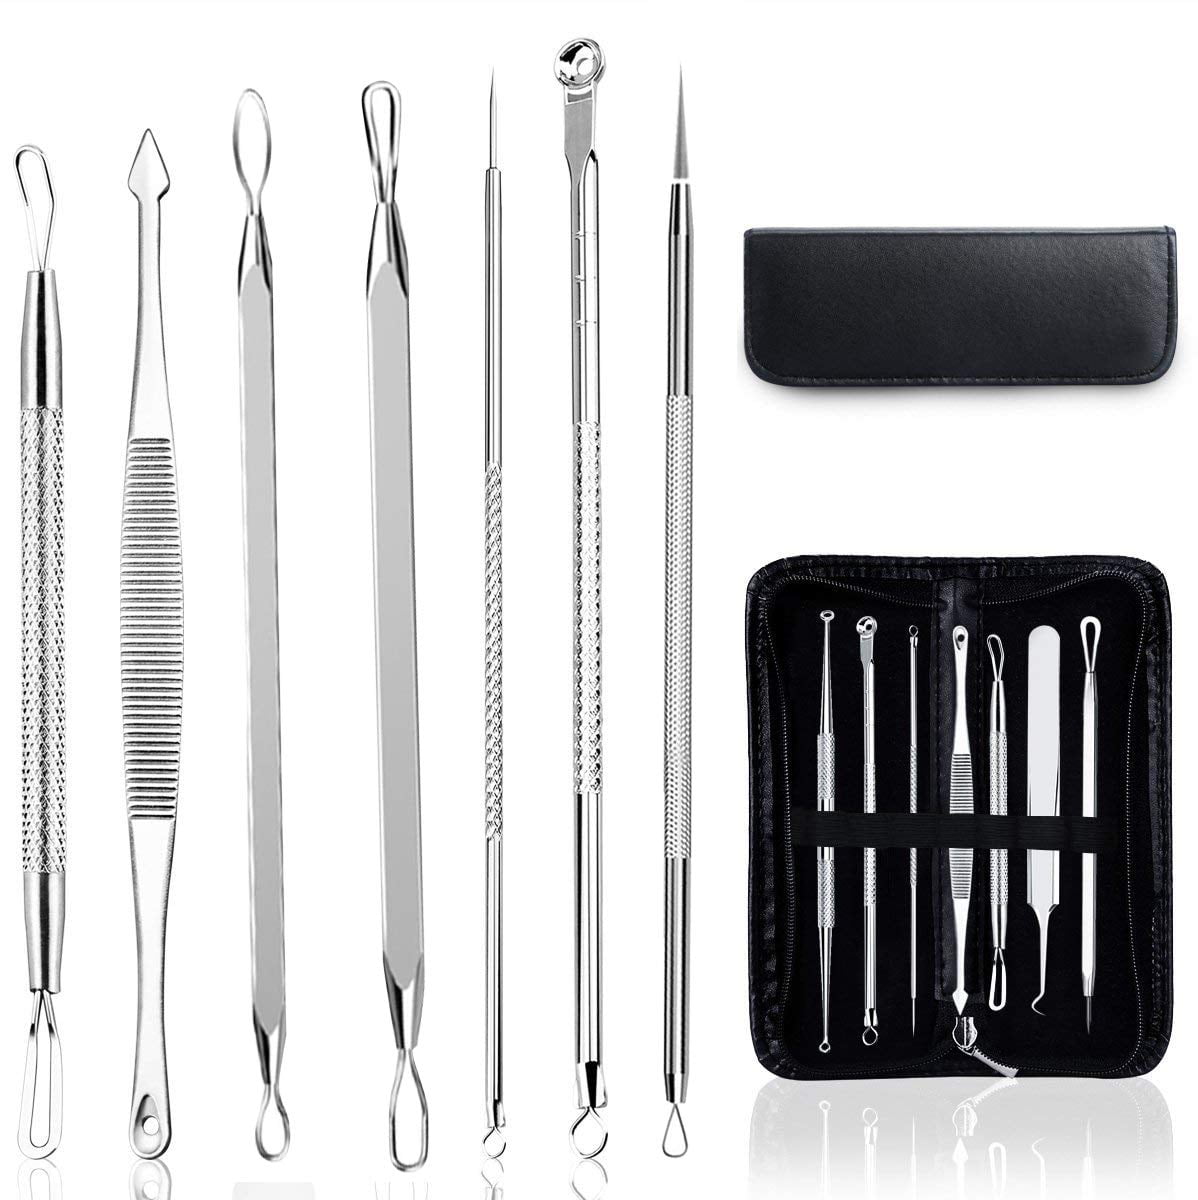 Pimple Tool Stainless Steel Blackhead Remover Tool Blackhead Tool Pimple Popping Pimple Extractor Kit Kit with Leather Bag - Walmart.com